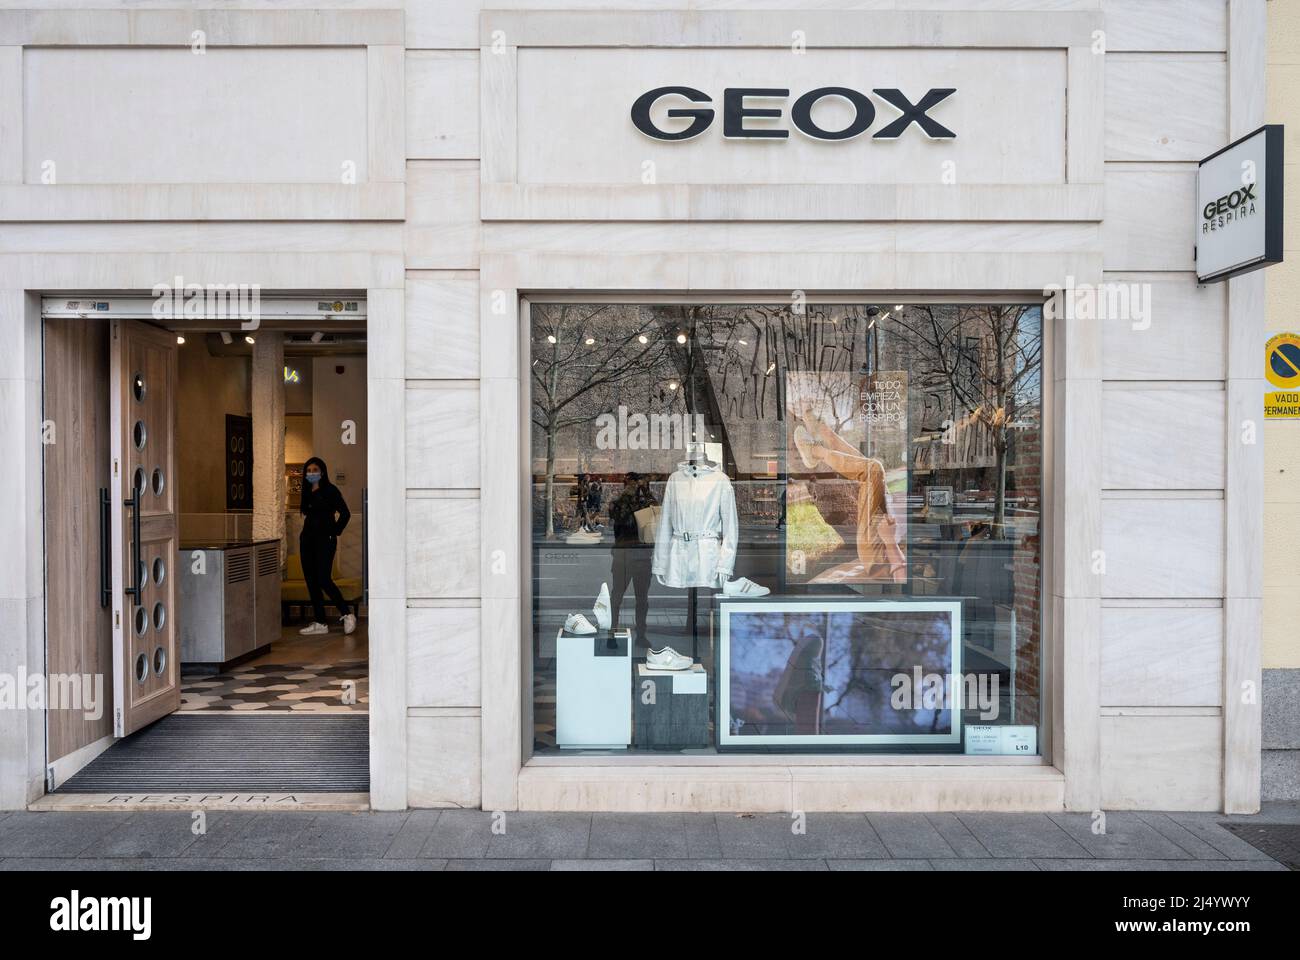 Page 3 - Geox High Resolution Stock Photography and Images - Alamy